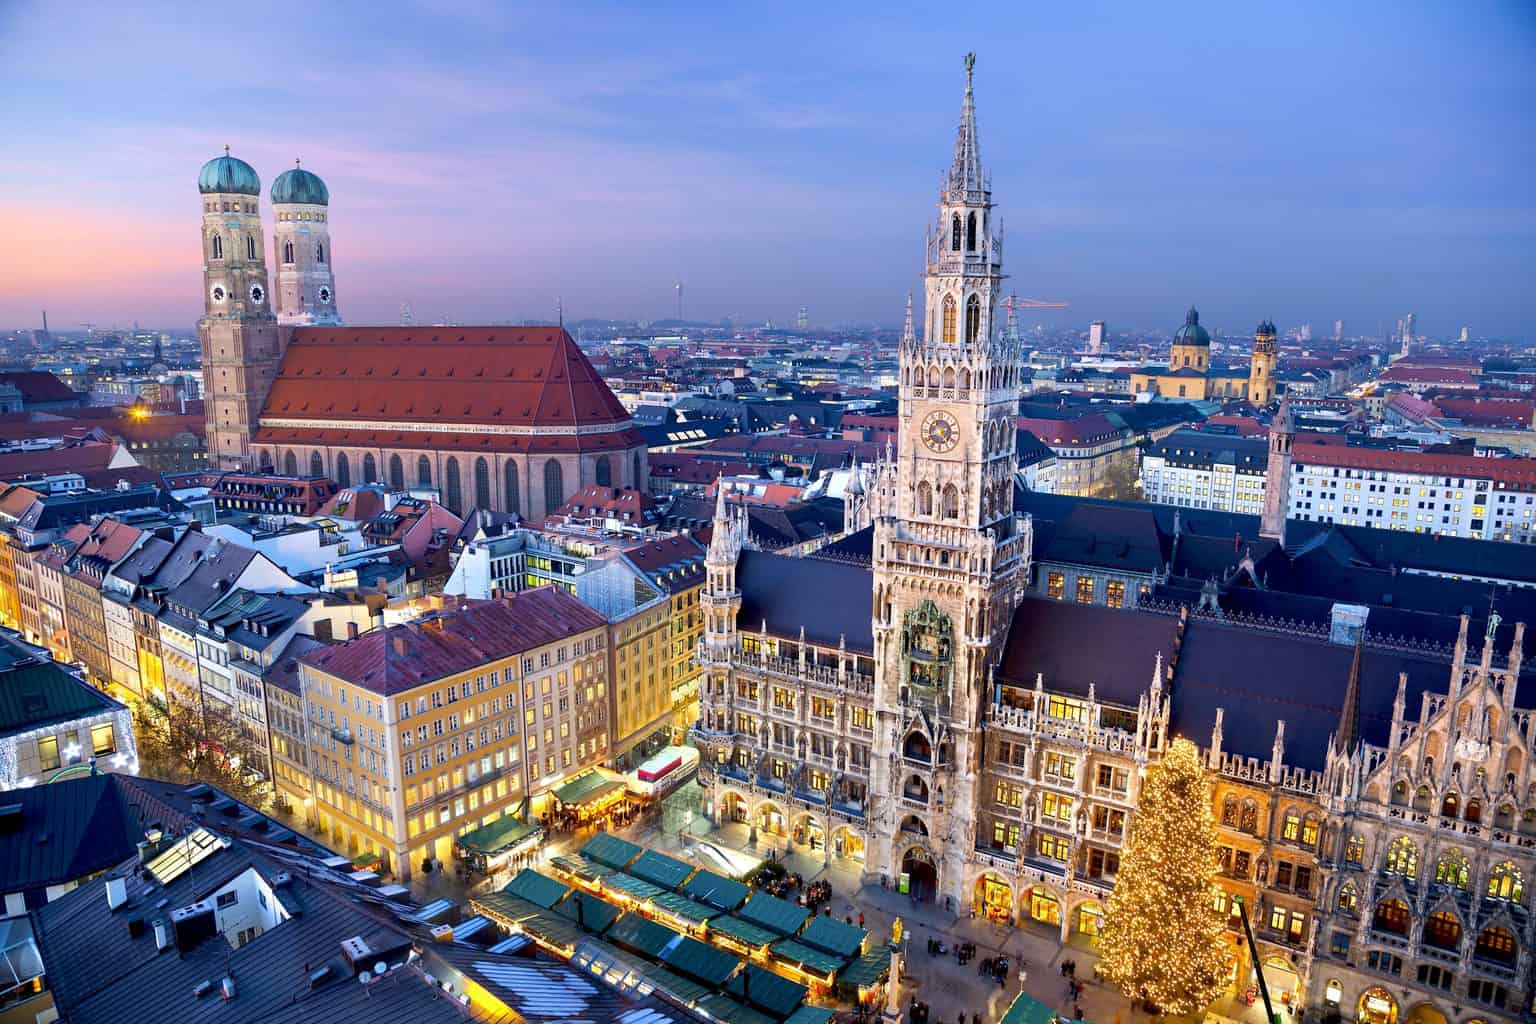 An aerial view of the Christmas decorations in Munich at dusk.